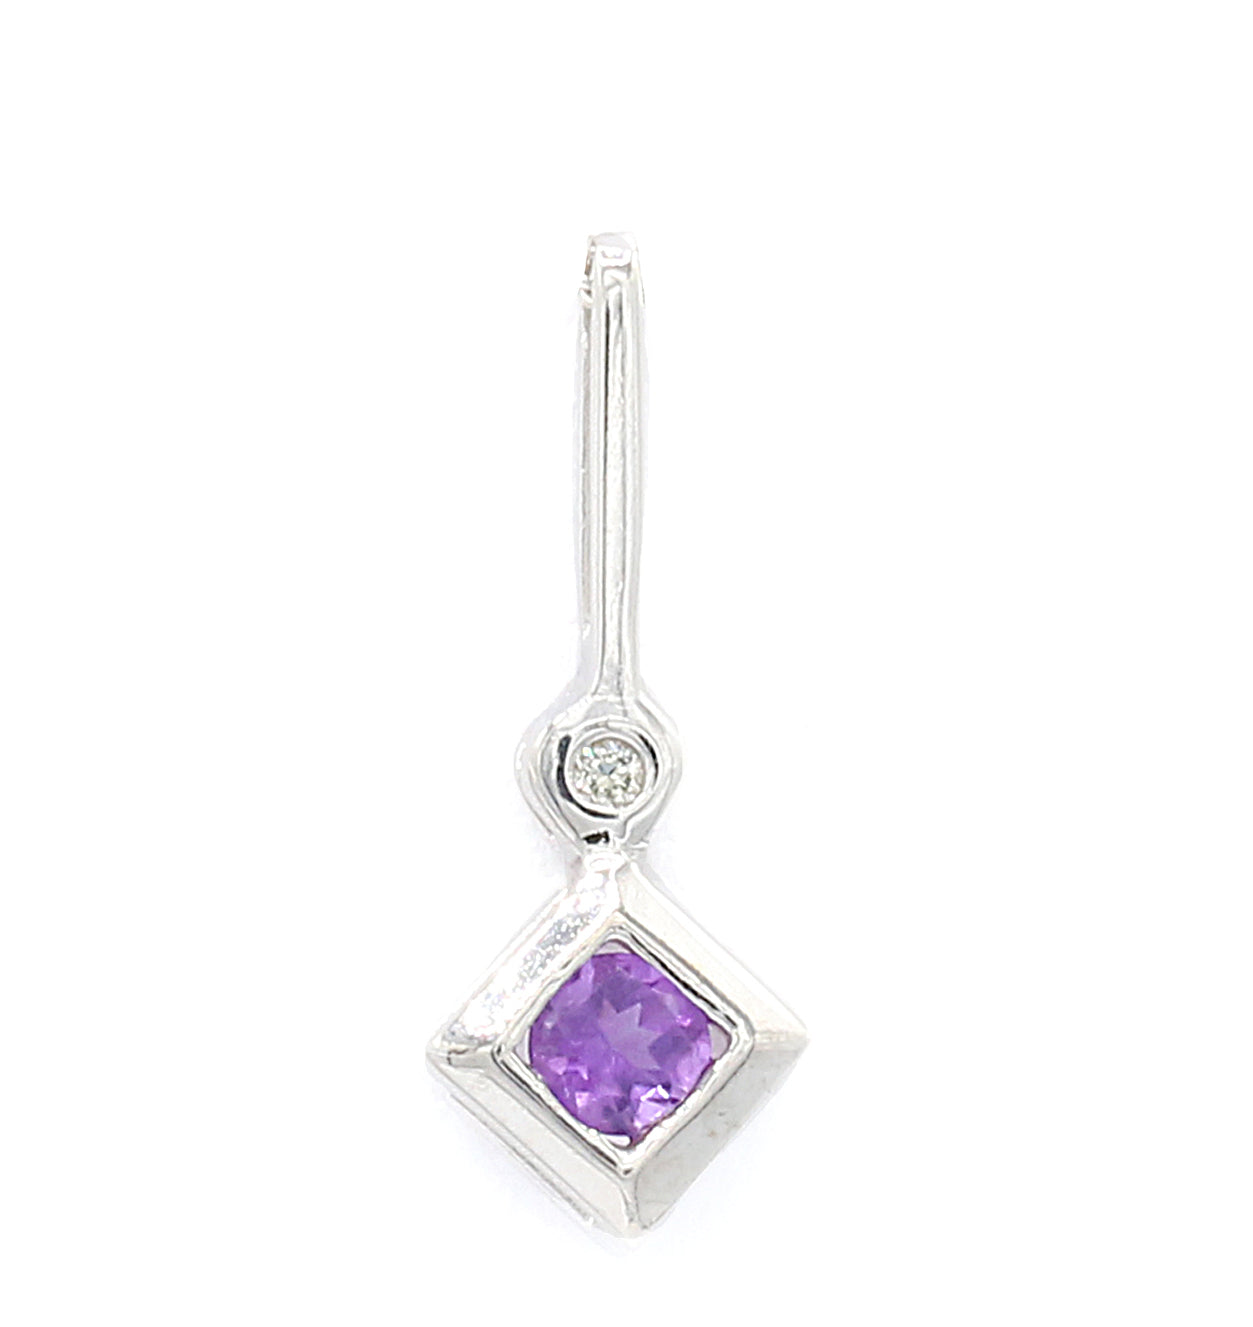 Golden Jewel 10K White Gold Choice of Gemstone & Diamond Pendant CHAIN NOT INCLUDED